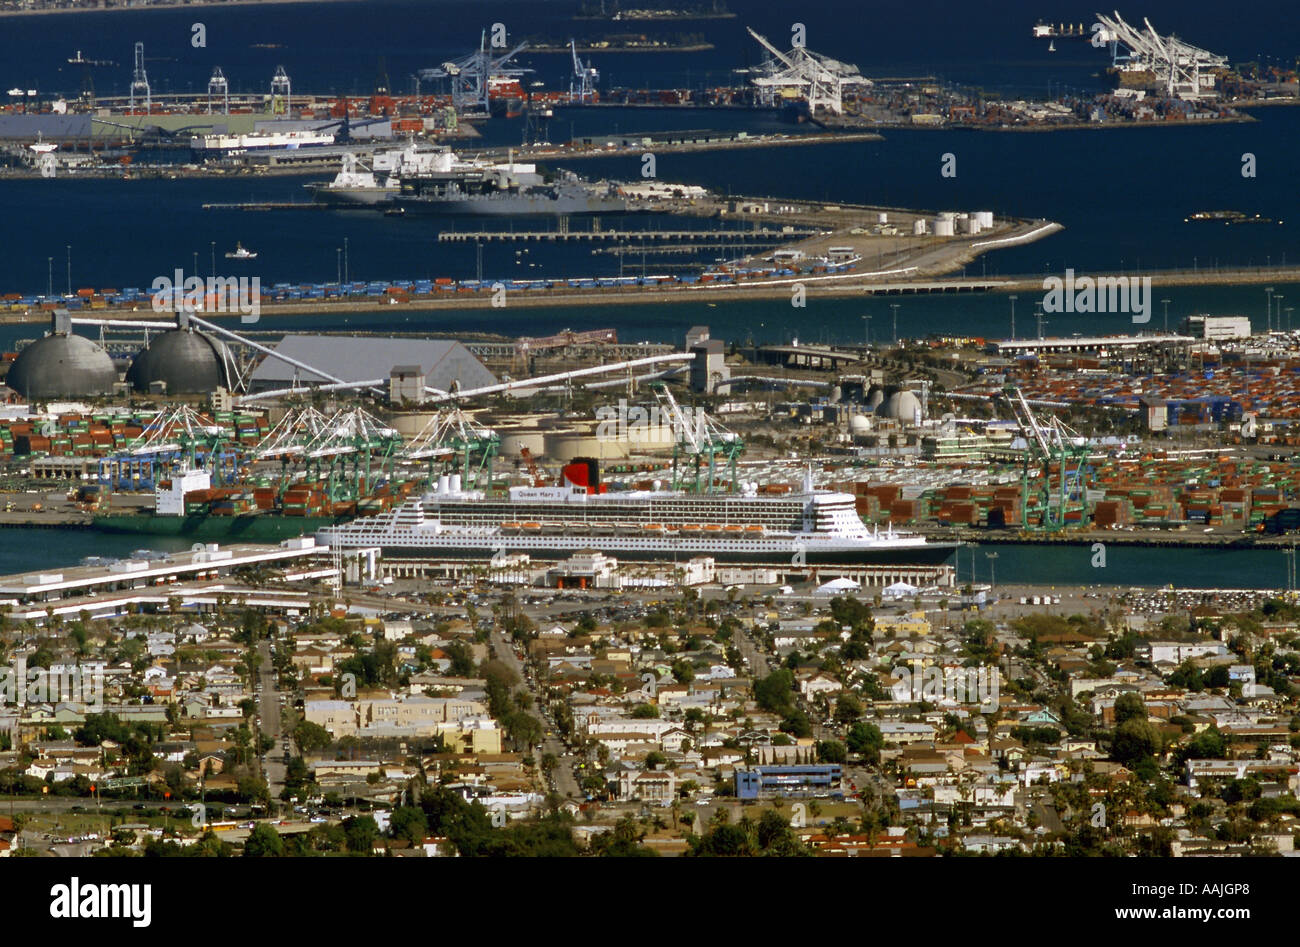 Amazing overview of the San Pedro harbor, Los Angeles, California while the Queen Mary 2 resides at berth 87 in the Main Channel Stock Photo